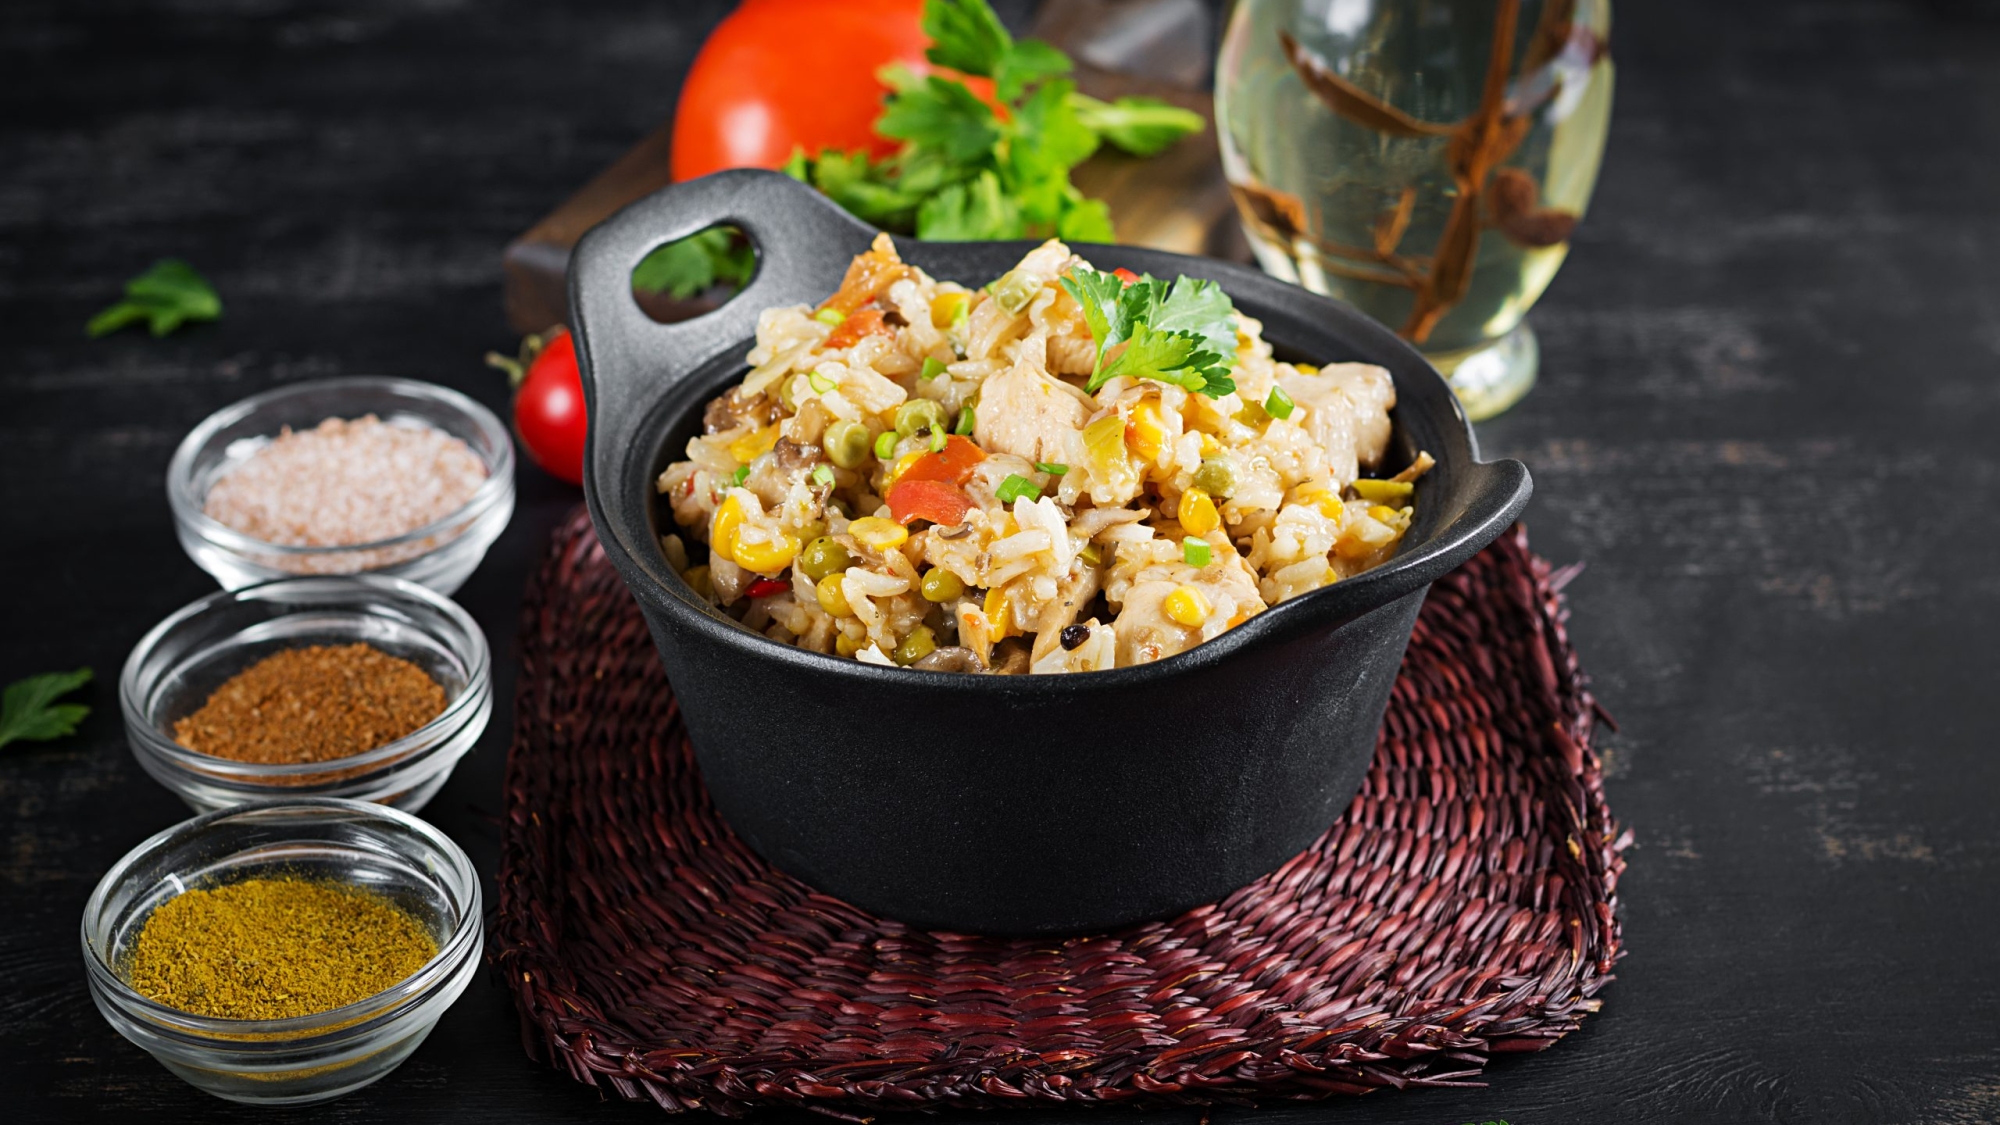 Rice with chicken and vegetables in bowl on dark background. Diet menu. Lunch.